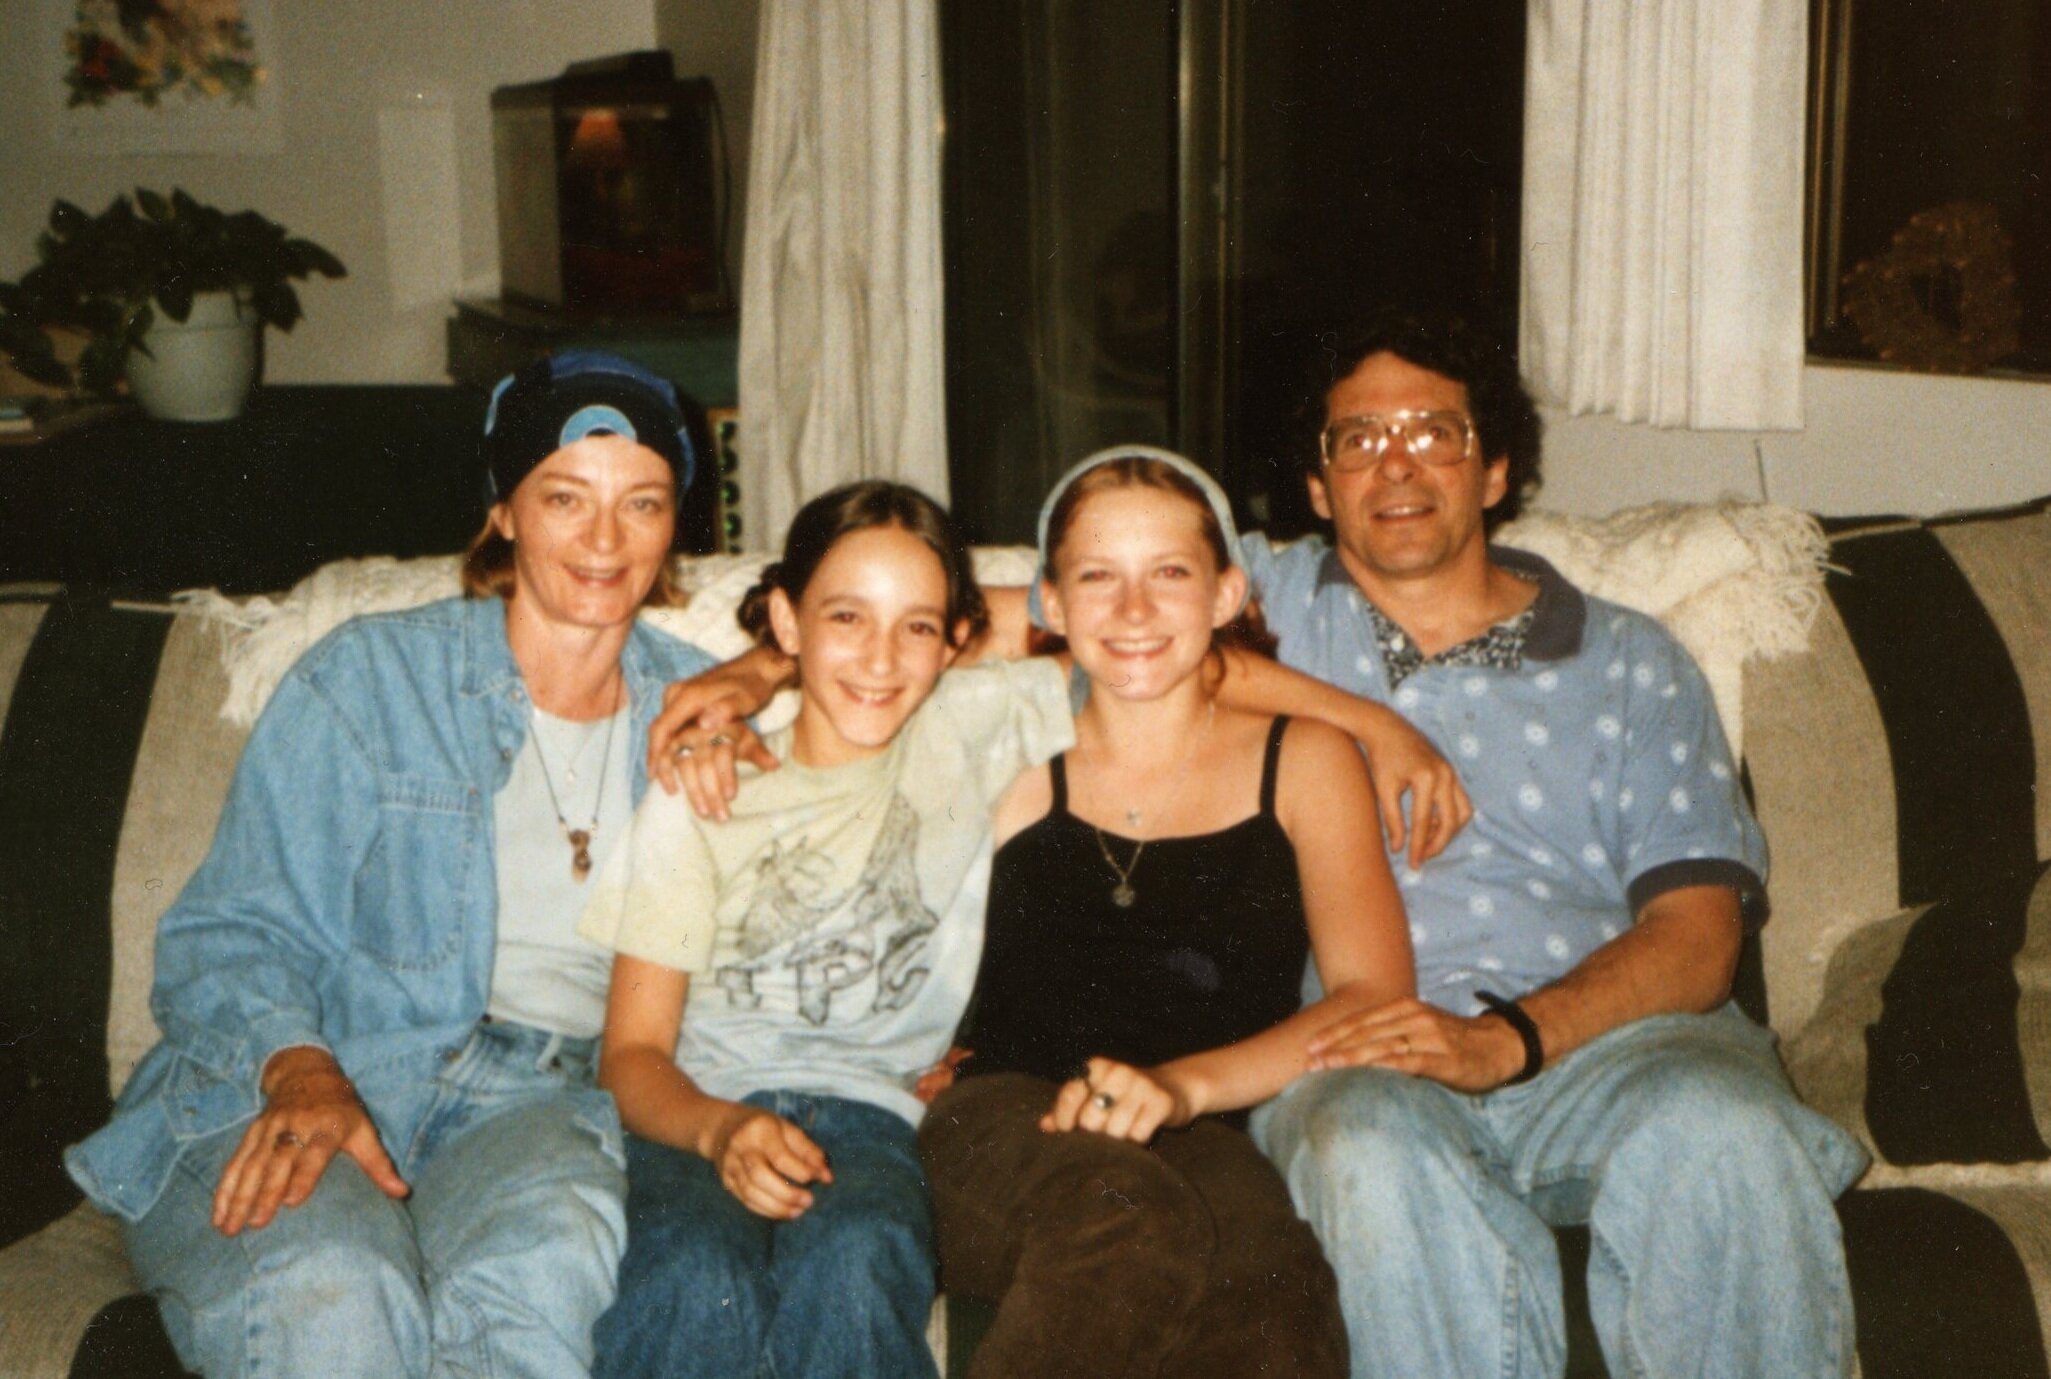 Michael with Raechel and their daughters